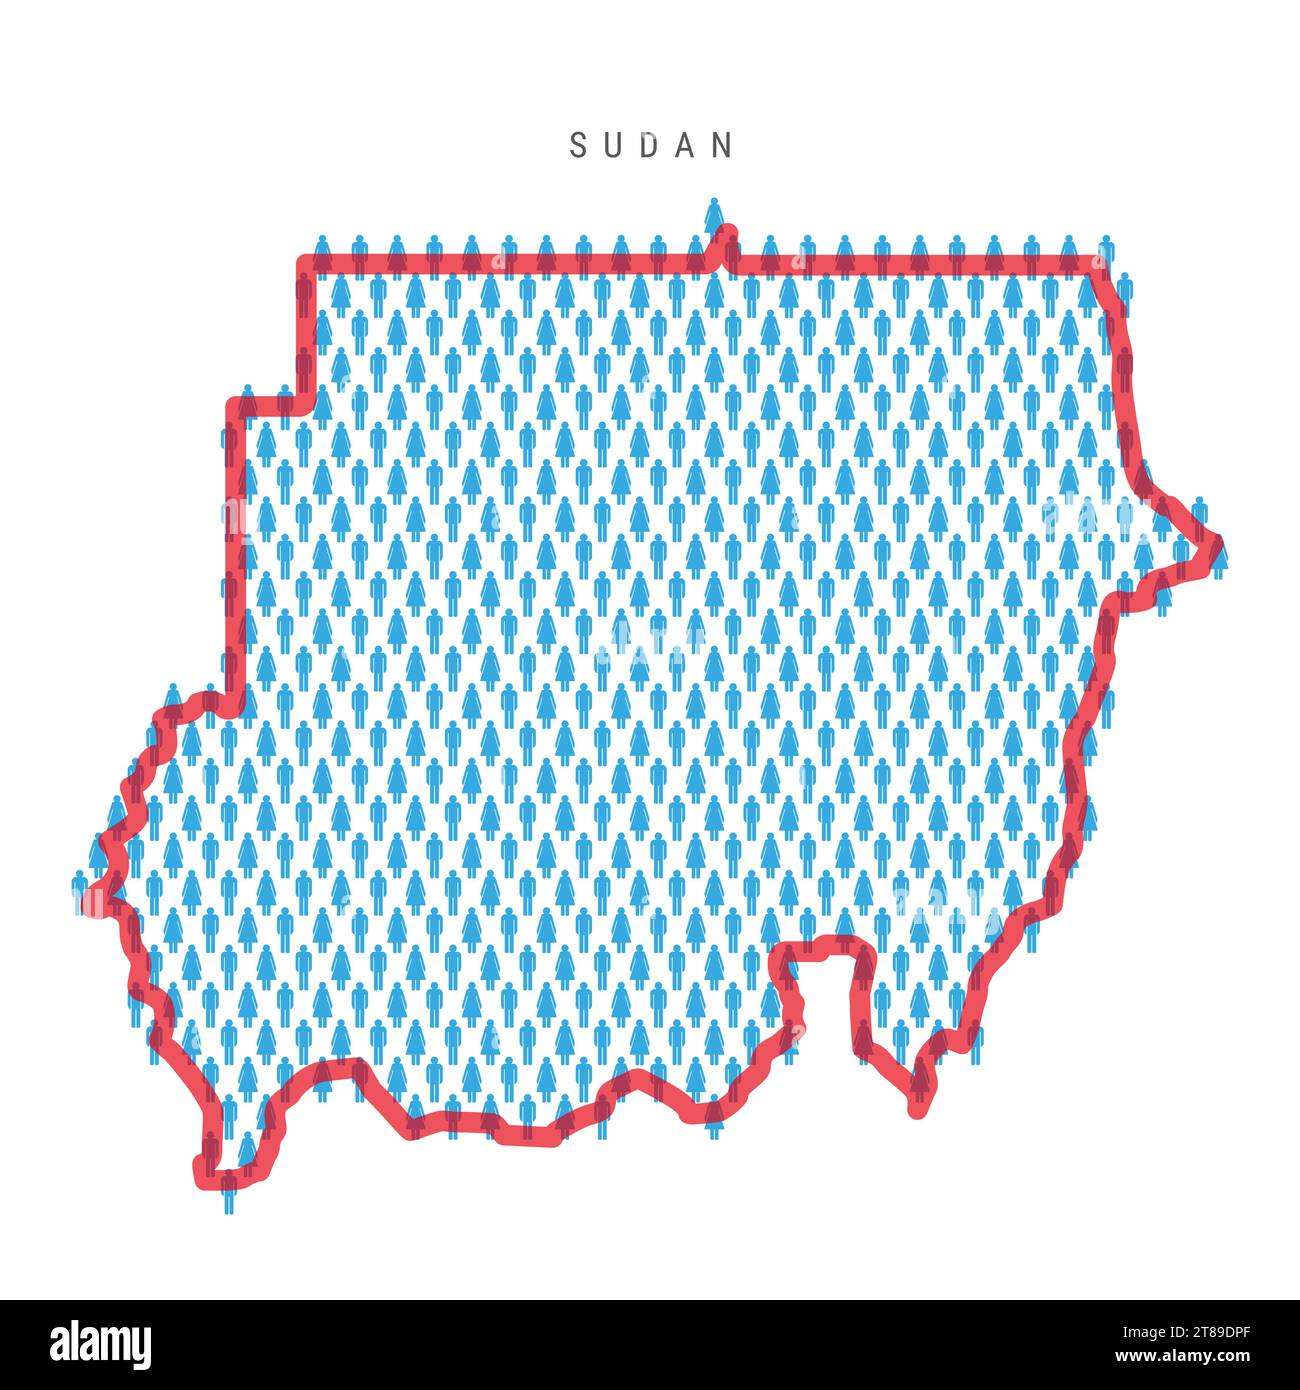 Sudan population map. Stick figures Sudanese people map with bold red translucent country border. Pattern of men and women icons. Isolated vector illu Stock Vector